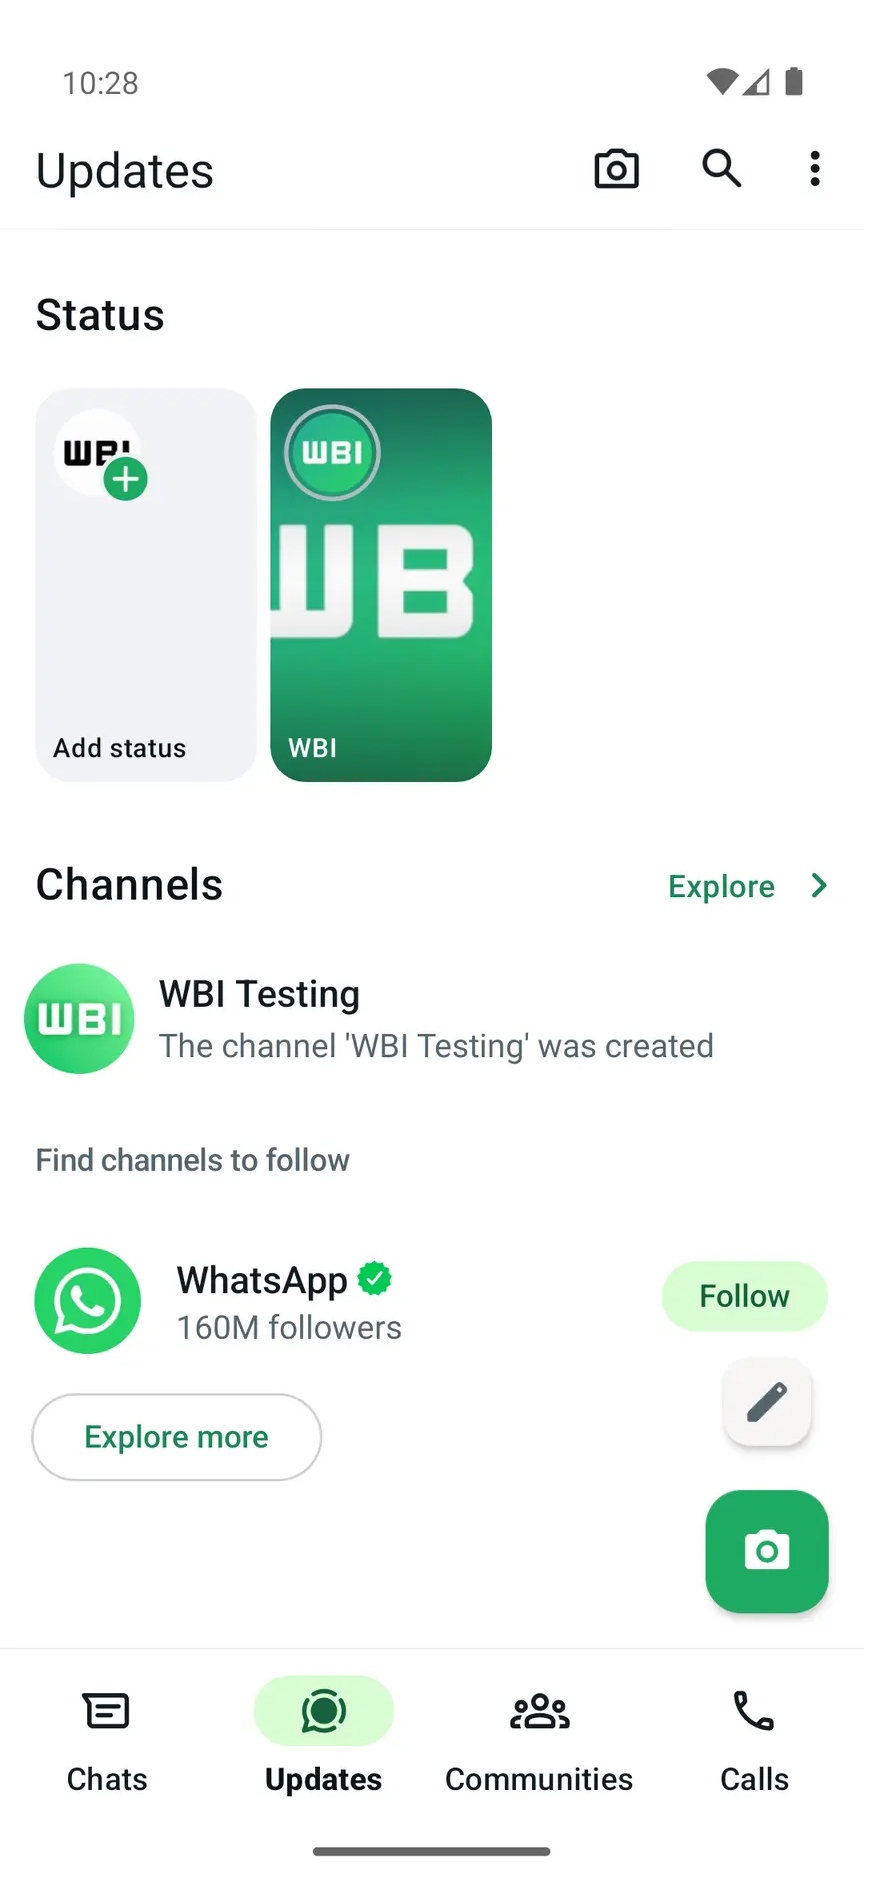 Change is brewing in terms of statuses and channel recommendations on WhatsApp © WABetaInfo